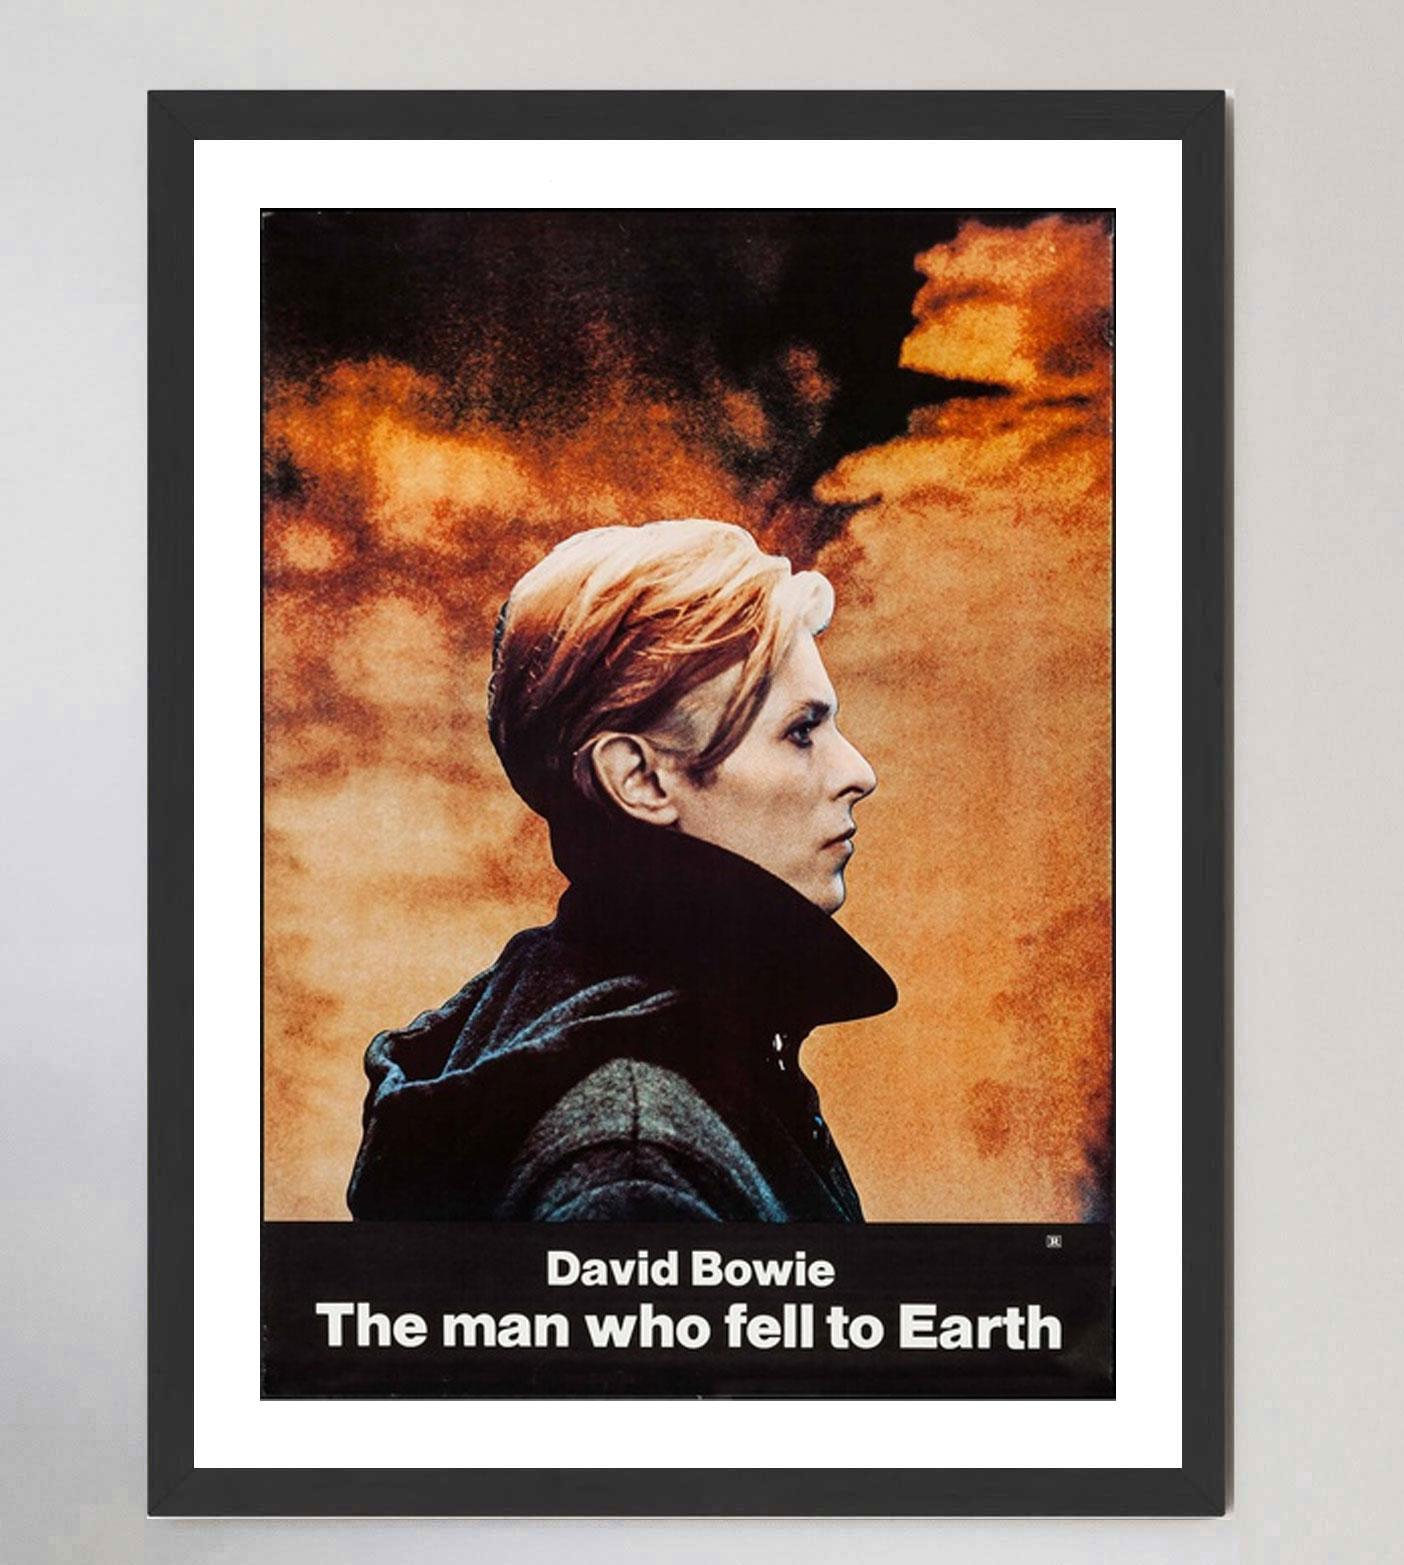 1976 David Bowie - The Man Who Fell To Earth Original Vintage Poster (Papier) im Angebot